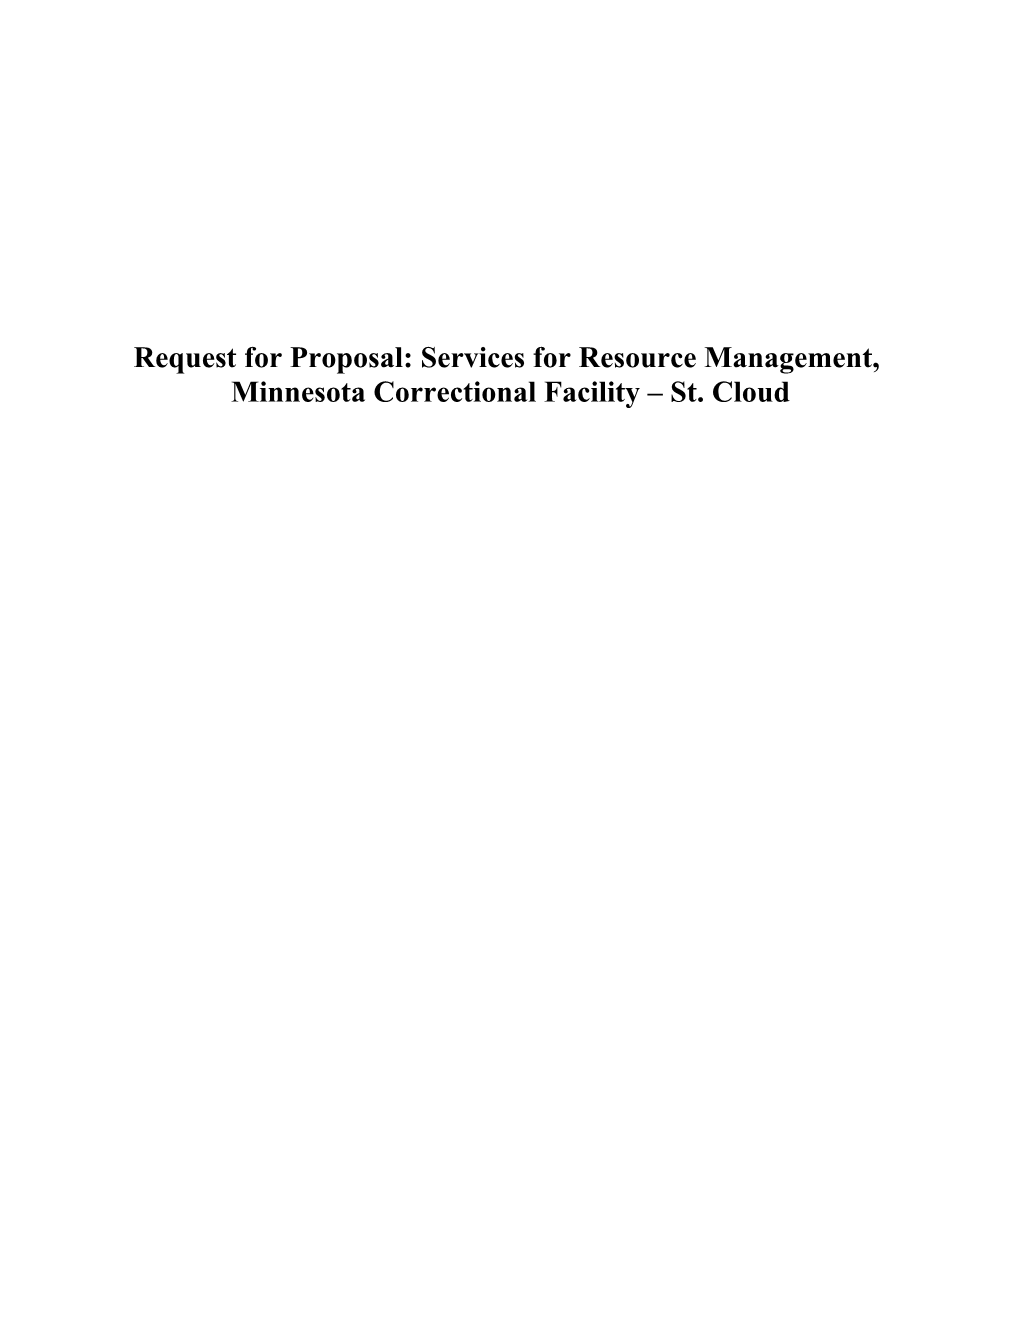 Request for Proposal: Services for Resource Management